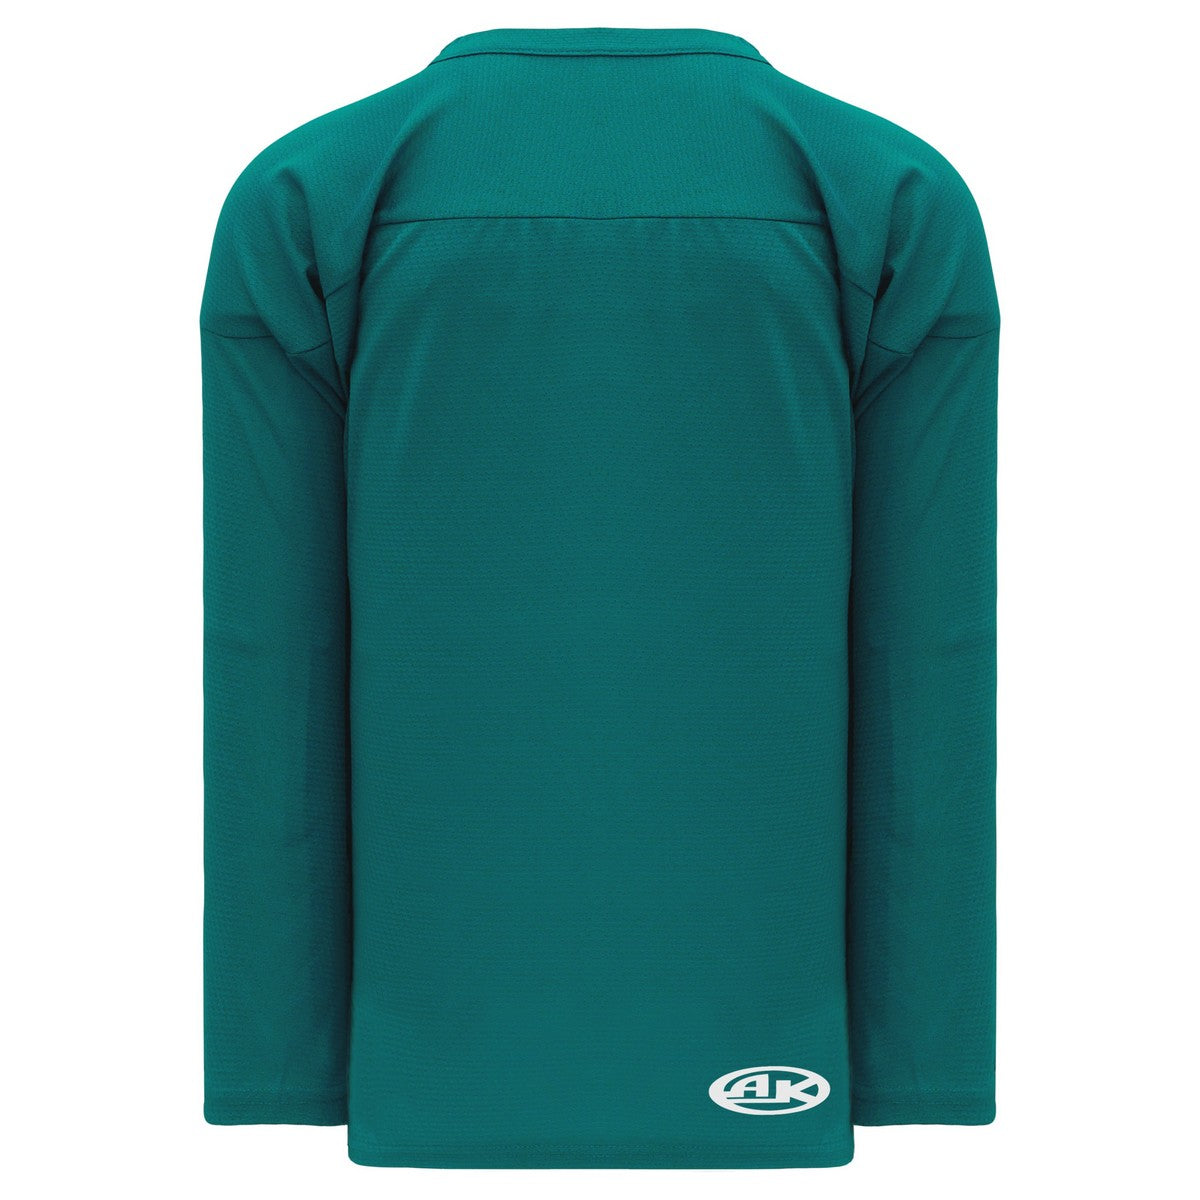 Practice Series H6000 Pacific Teal Hockey Jersey